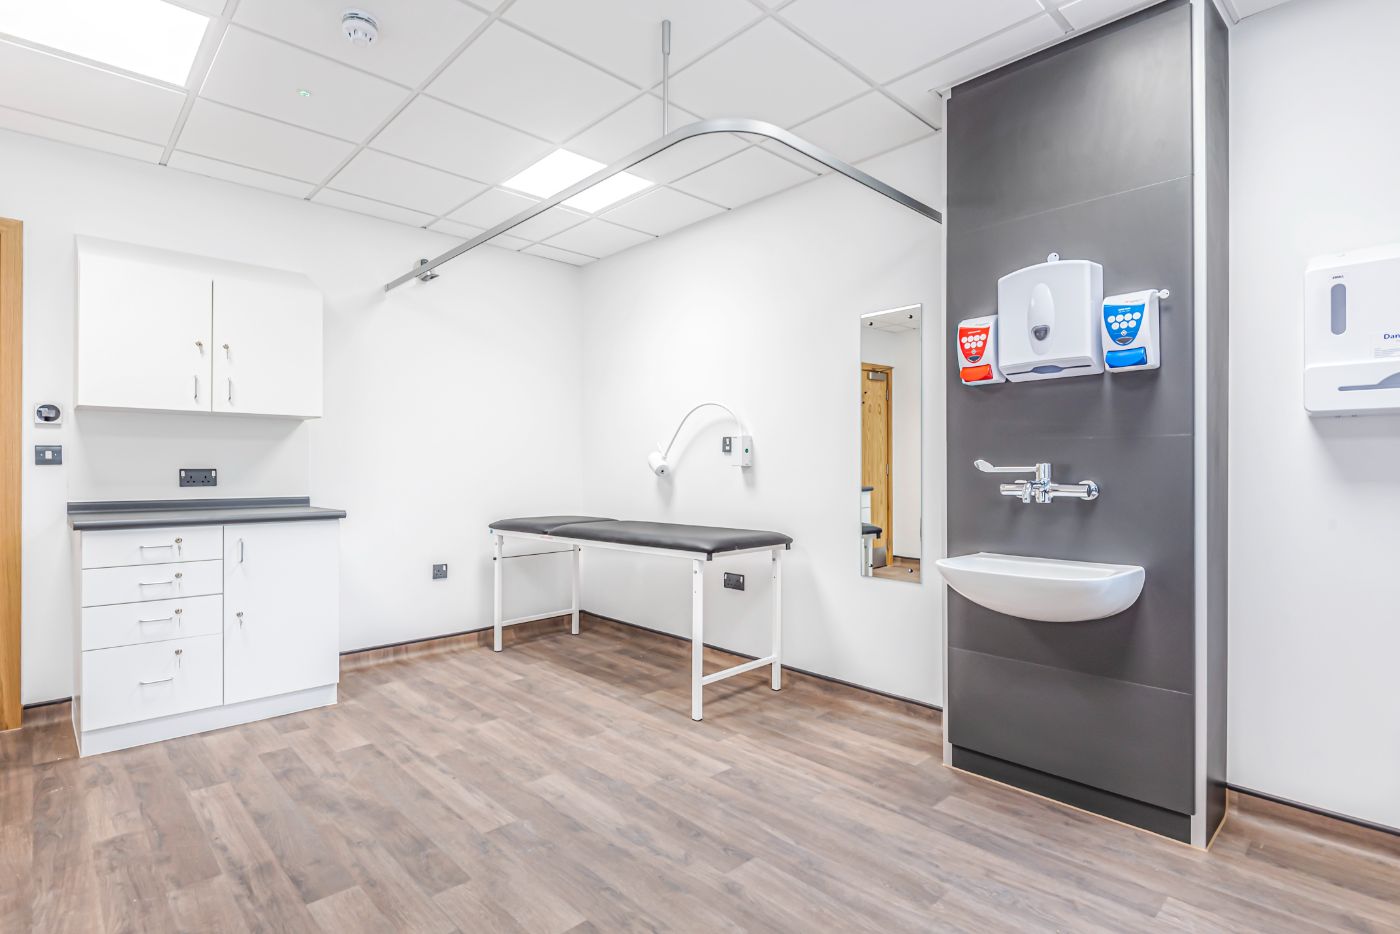 Specialist Property Advice to the Primary Care Sector